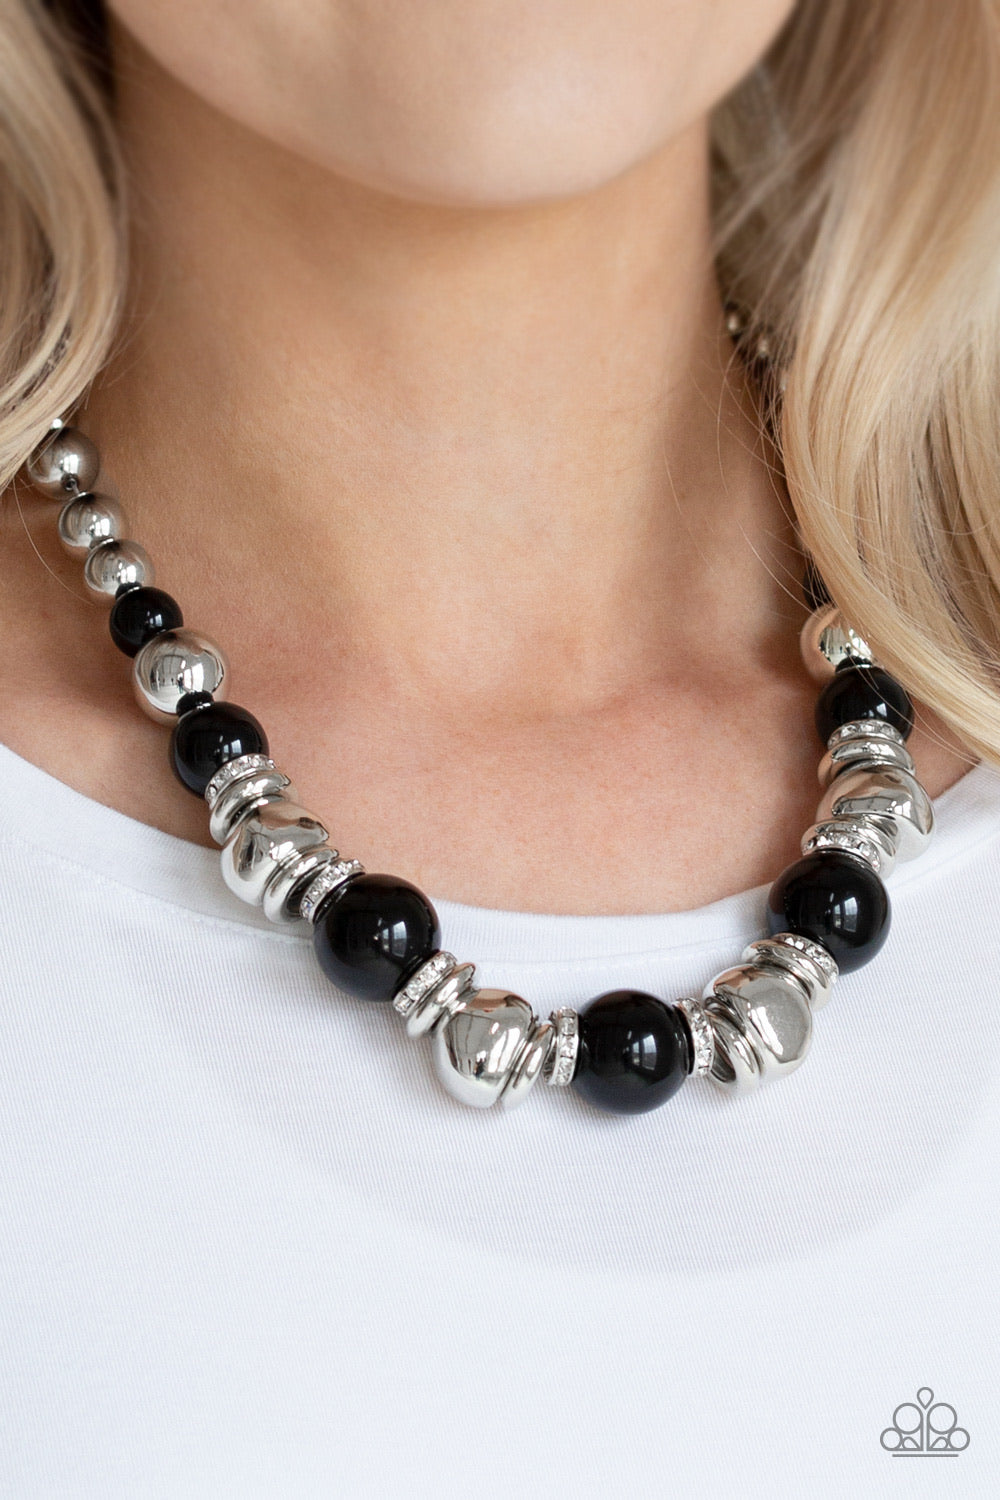 Hollywood HAUTE Spot - Black - Bling With Crystal